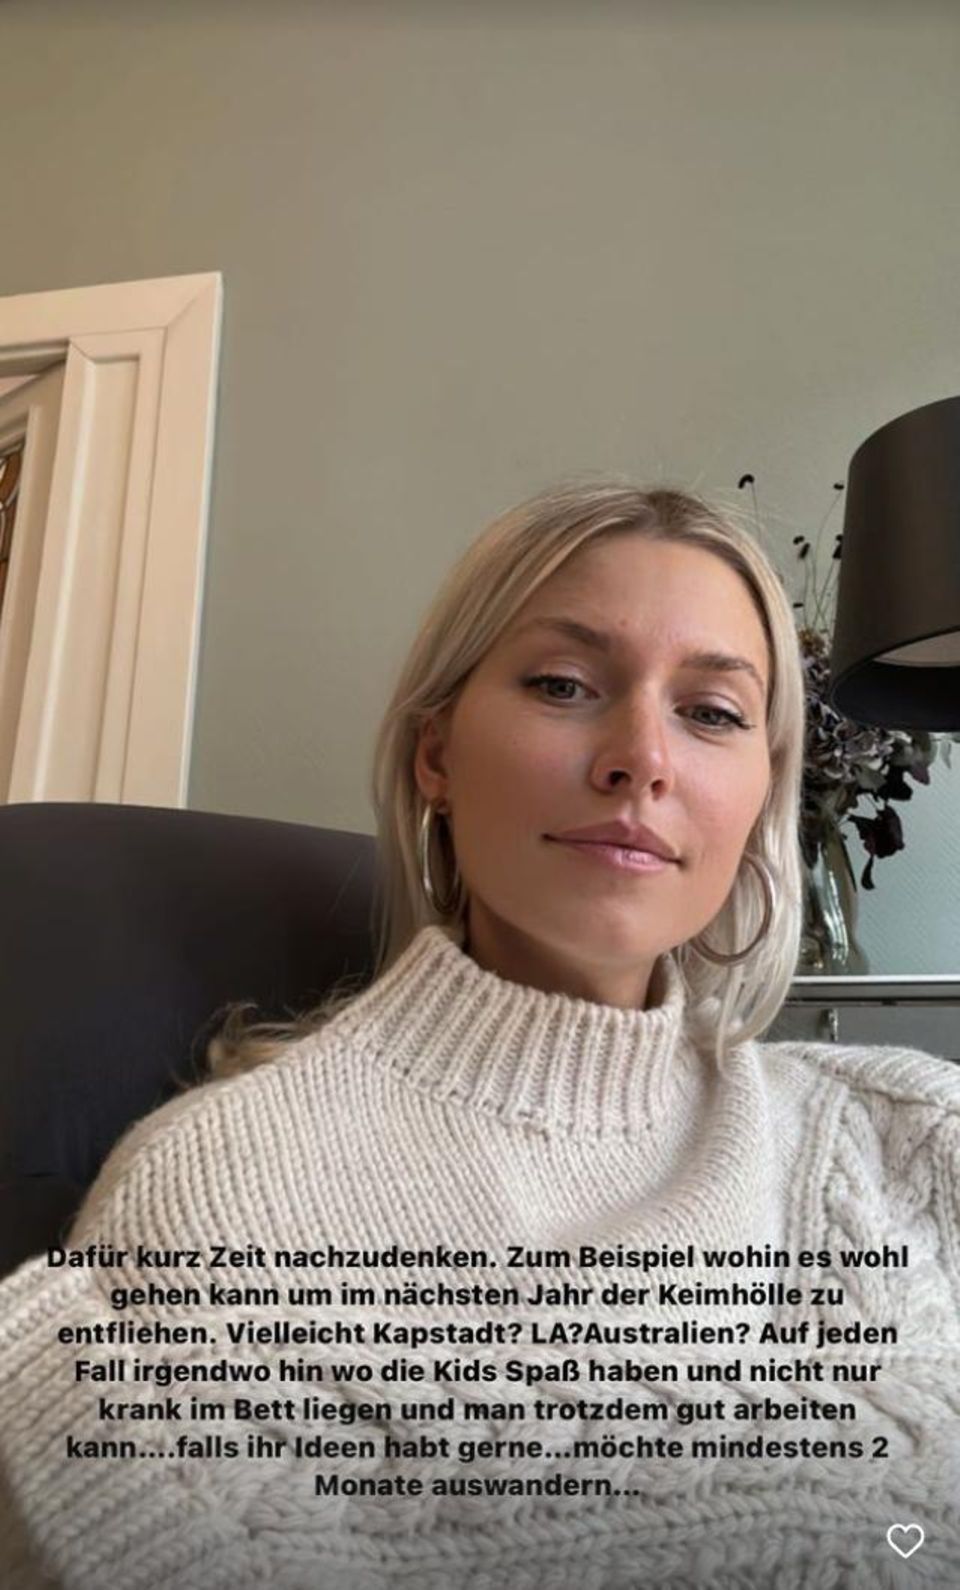 Lena Gercke: Because "germ hell" the model thinks about emigrating